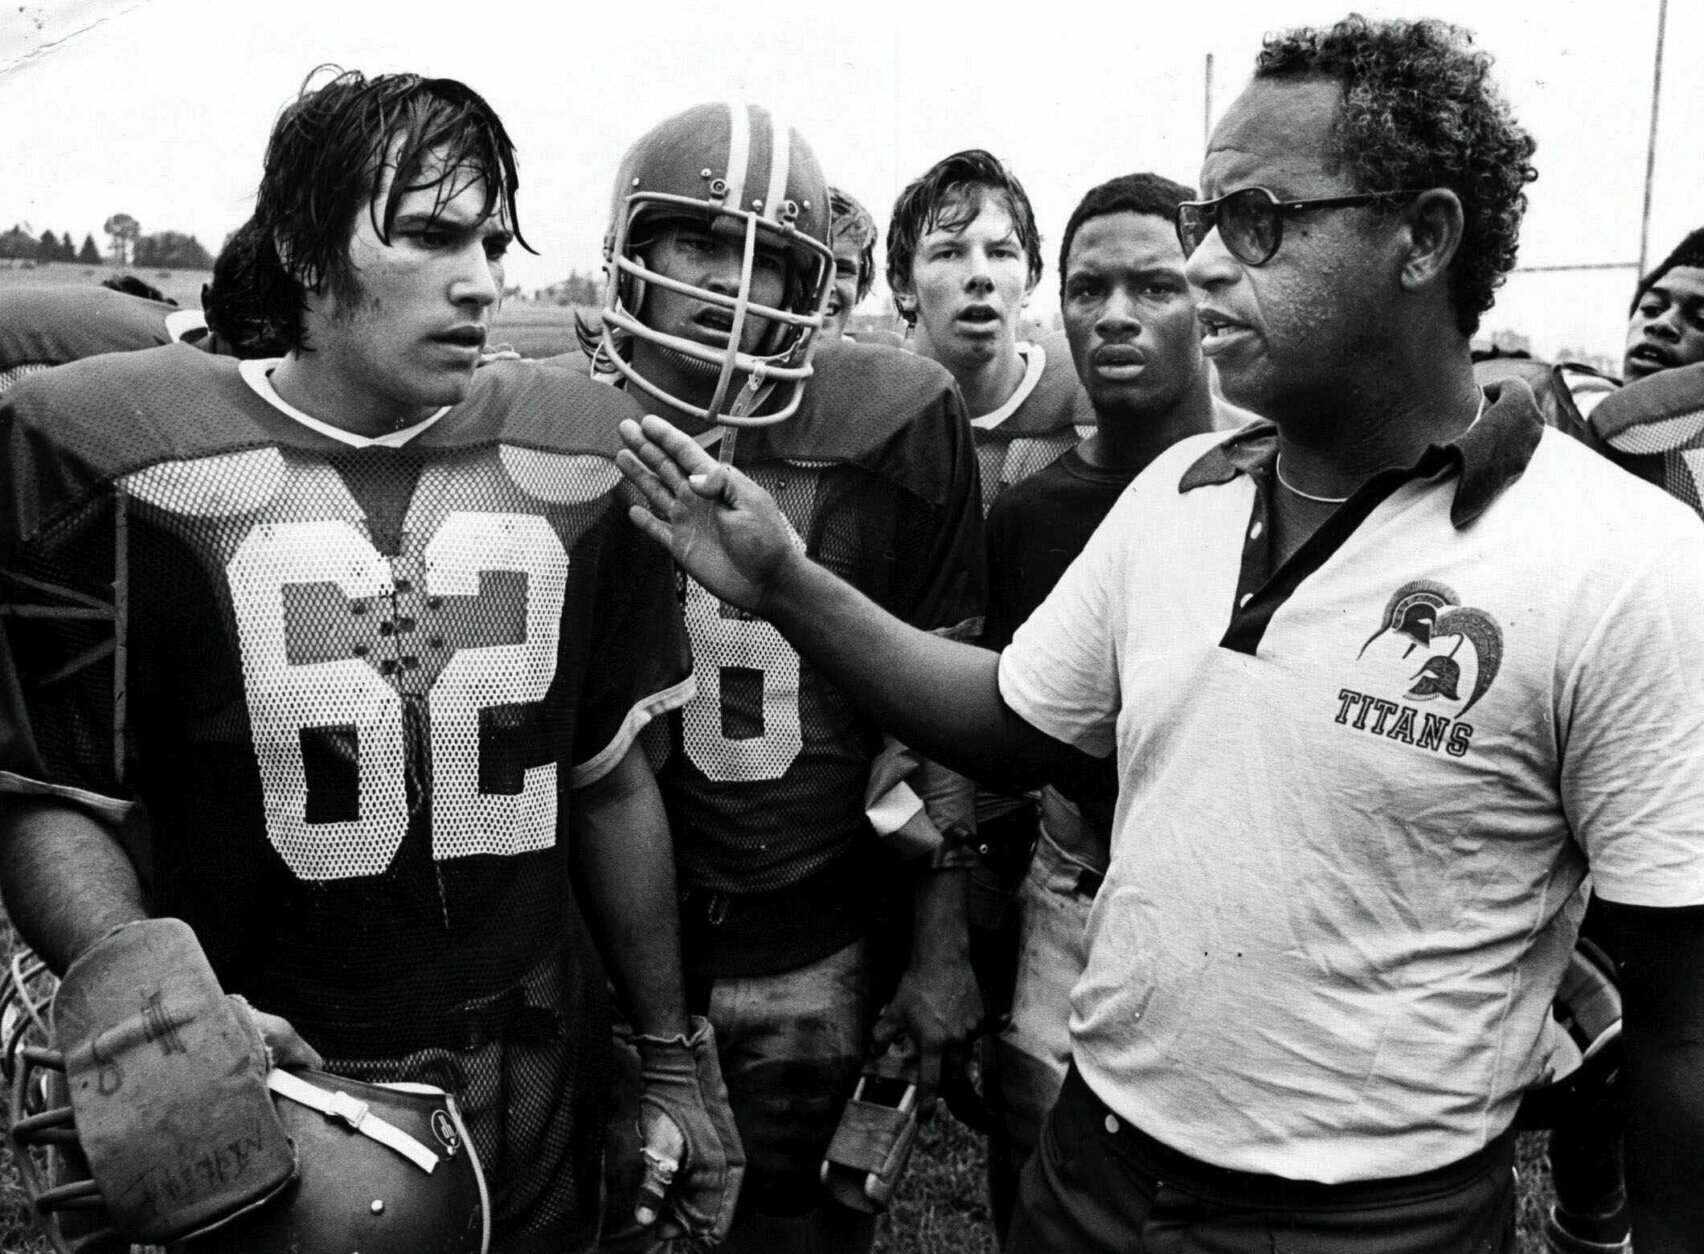 Alexandria, Va's., T.C. Williams High School football coach Herman Boone, right, during a break at summer camp, in 1971, with guard Johnny Colantuoni, (62) and John Vaughn, center. The famous 1971 team will be memorialized by Denzel Washington and Disney films in "Remember the Titans." (AP Photo)